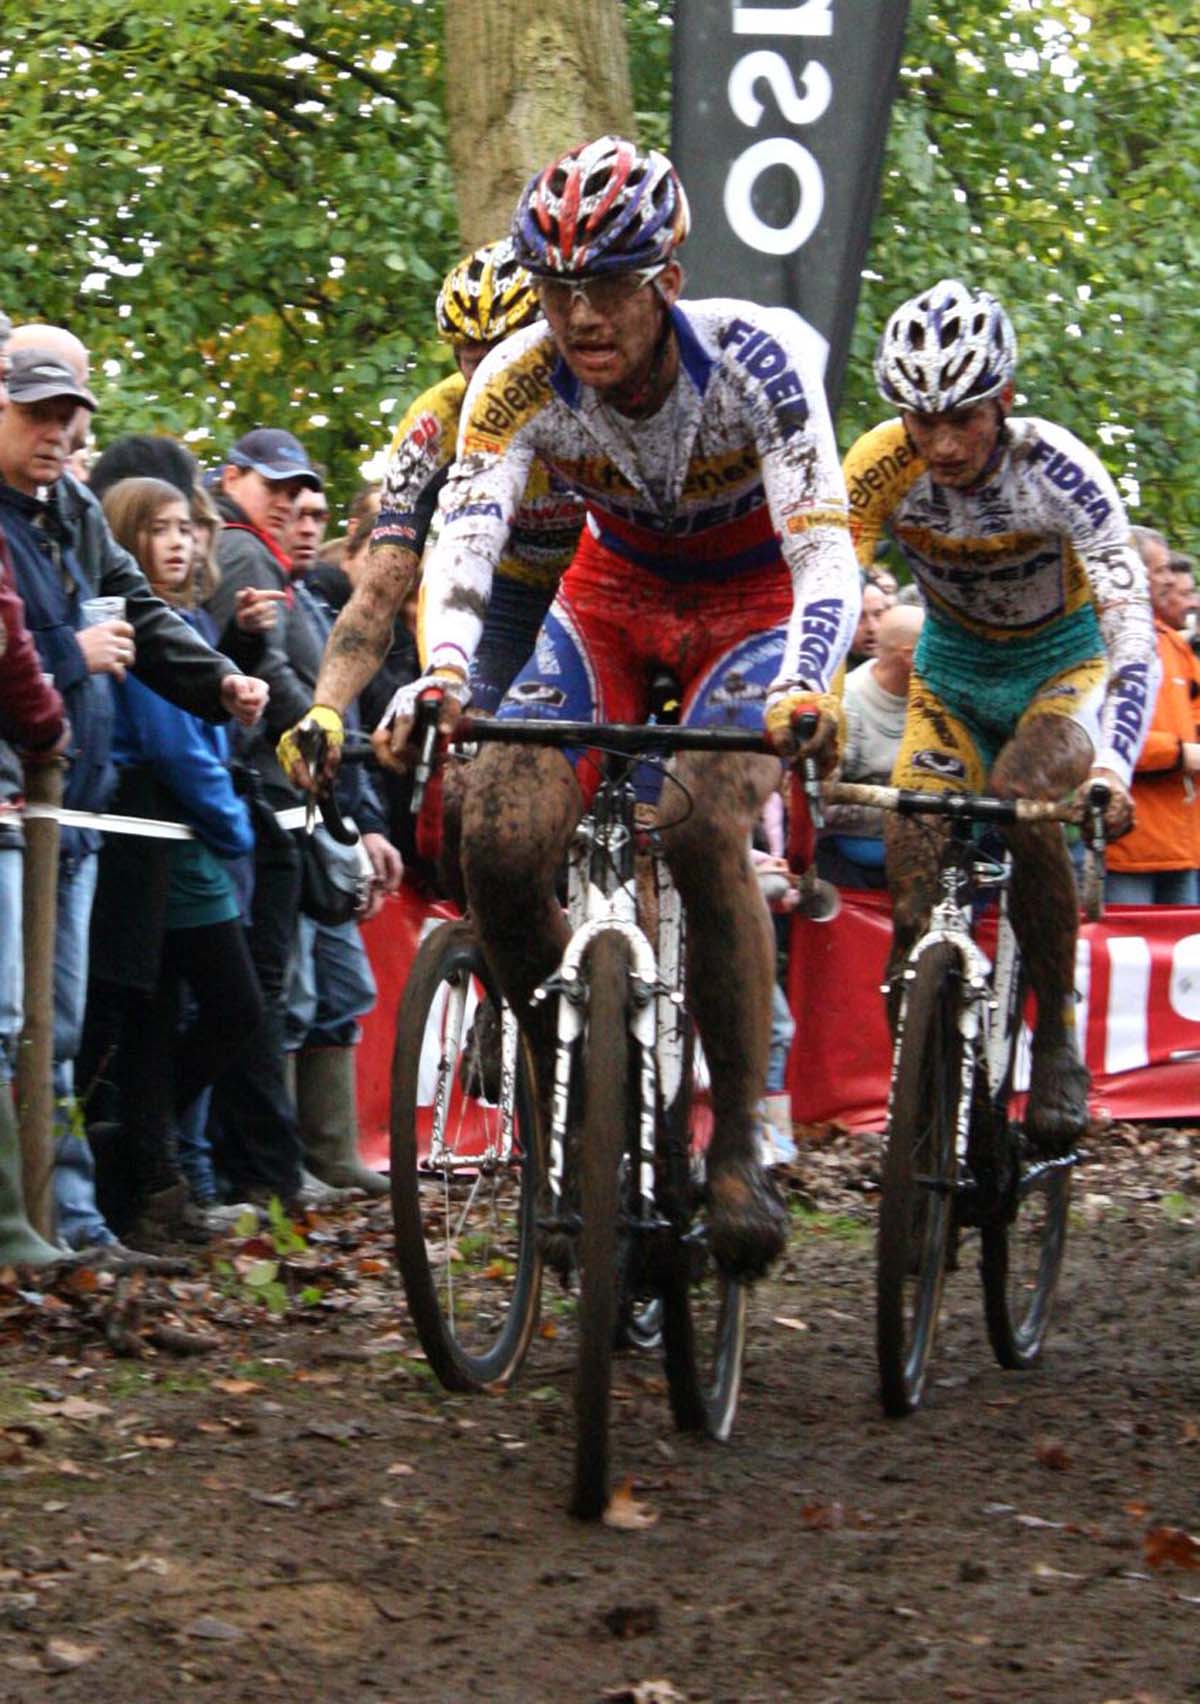 Stybar leads Vantornout and Pauwels in an early part of the race. ? Dan Seaton